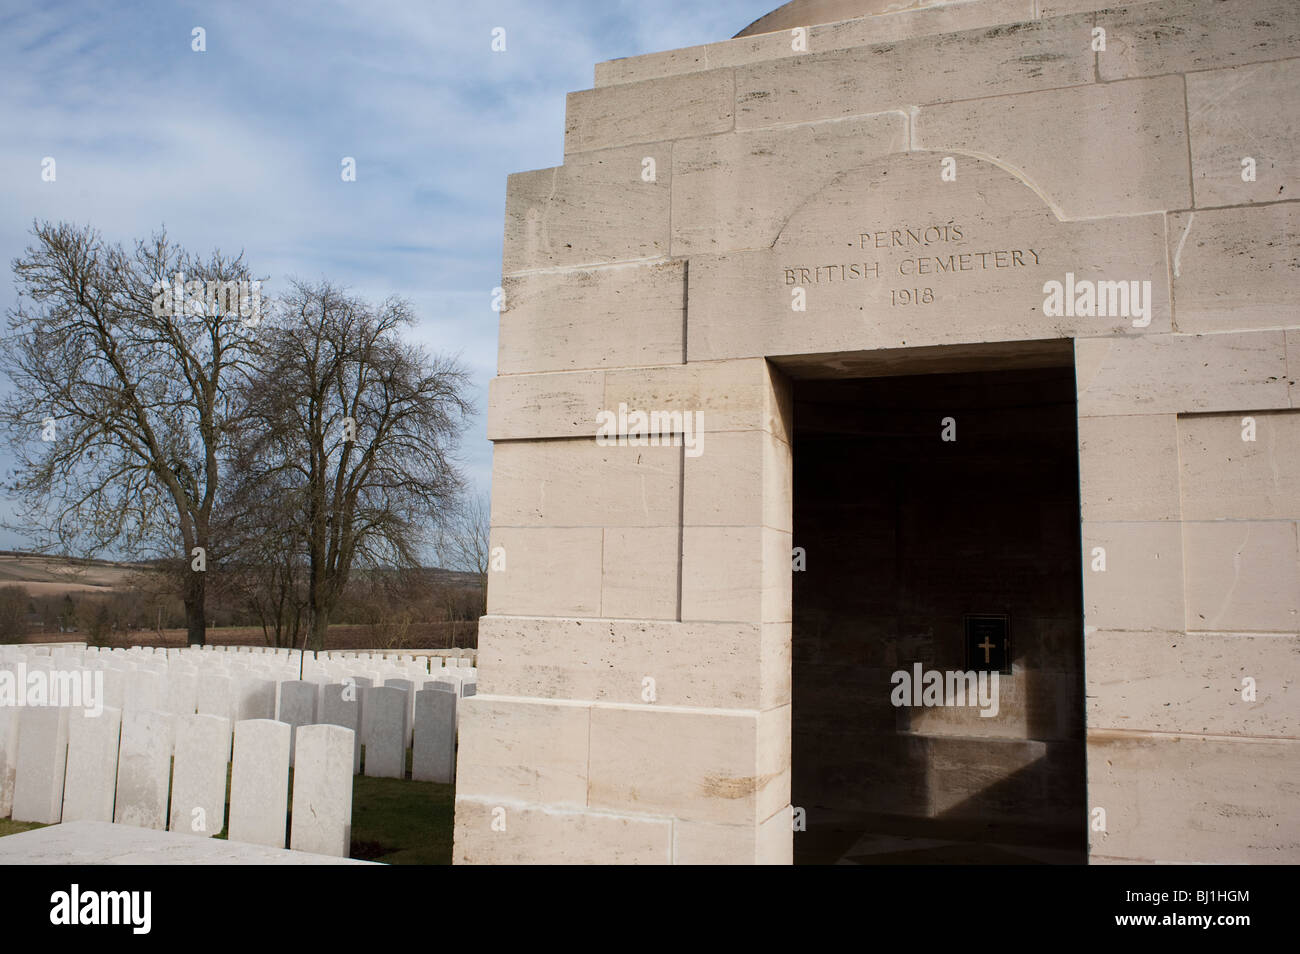 Somme Region, North of France, WW1 British Cemetery in Pernois, Mausoleum Building Stock Photo